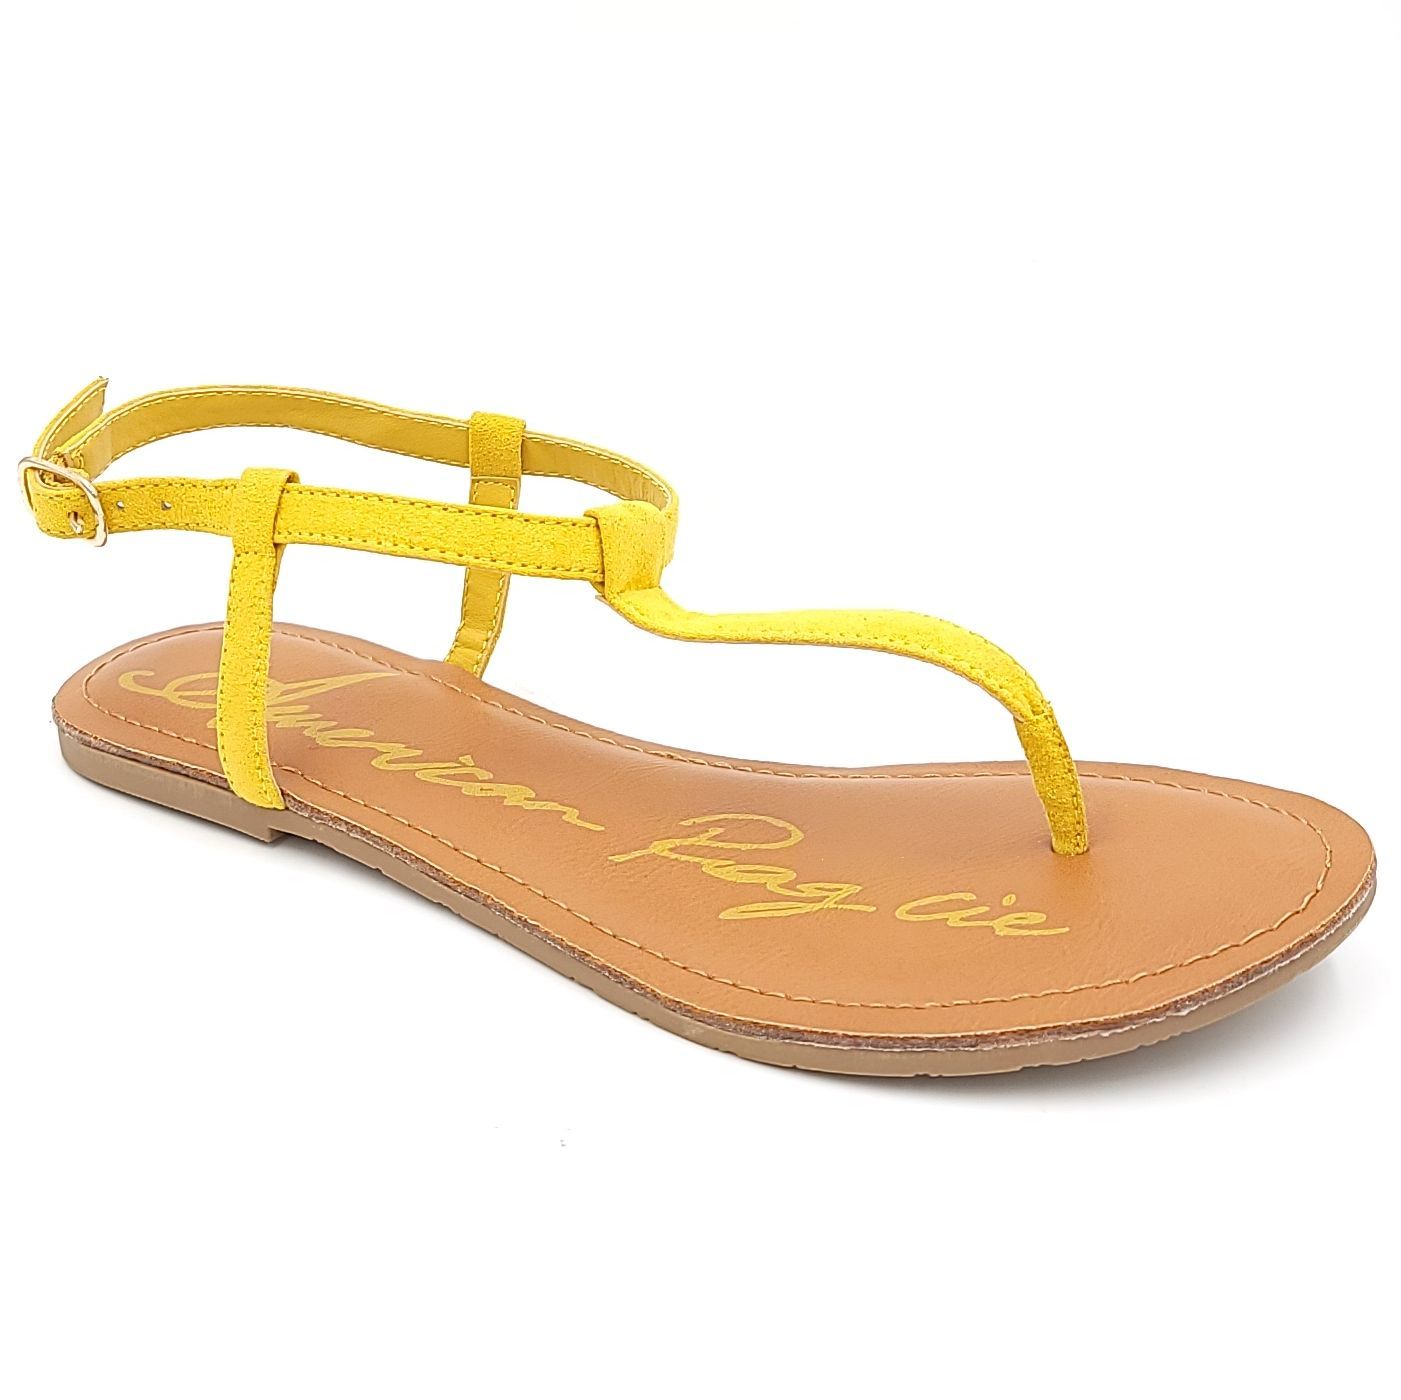 Primary image for American Rag Cie Women Slingback Thong Sandals Krista Size US 5.5M Yellow